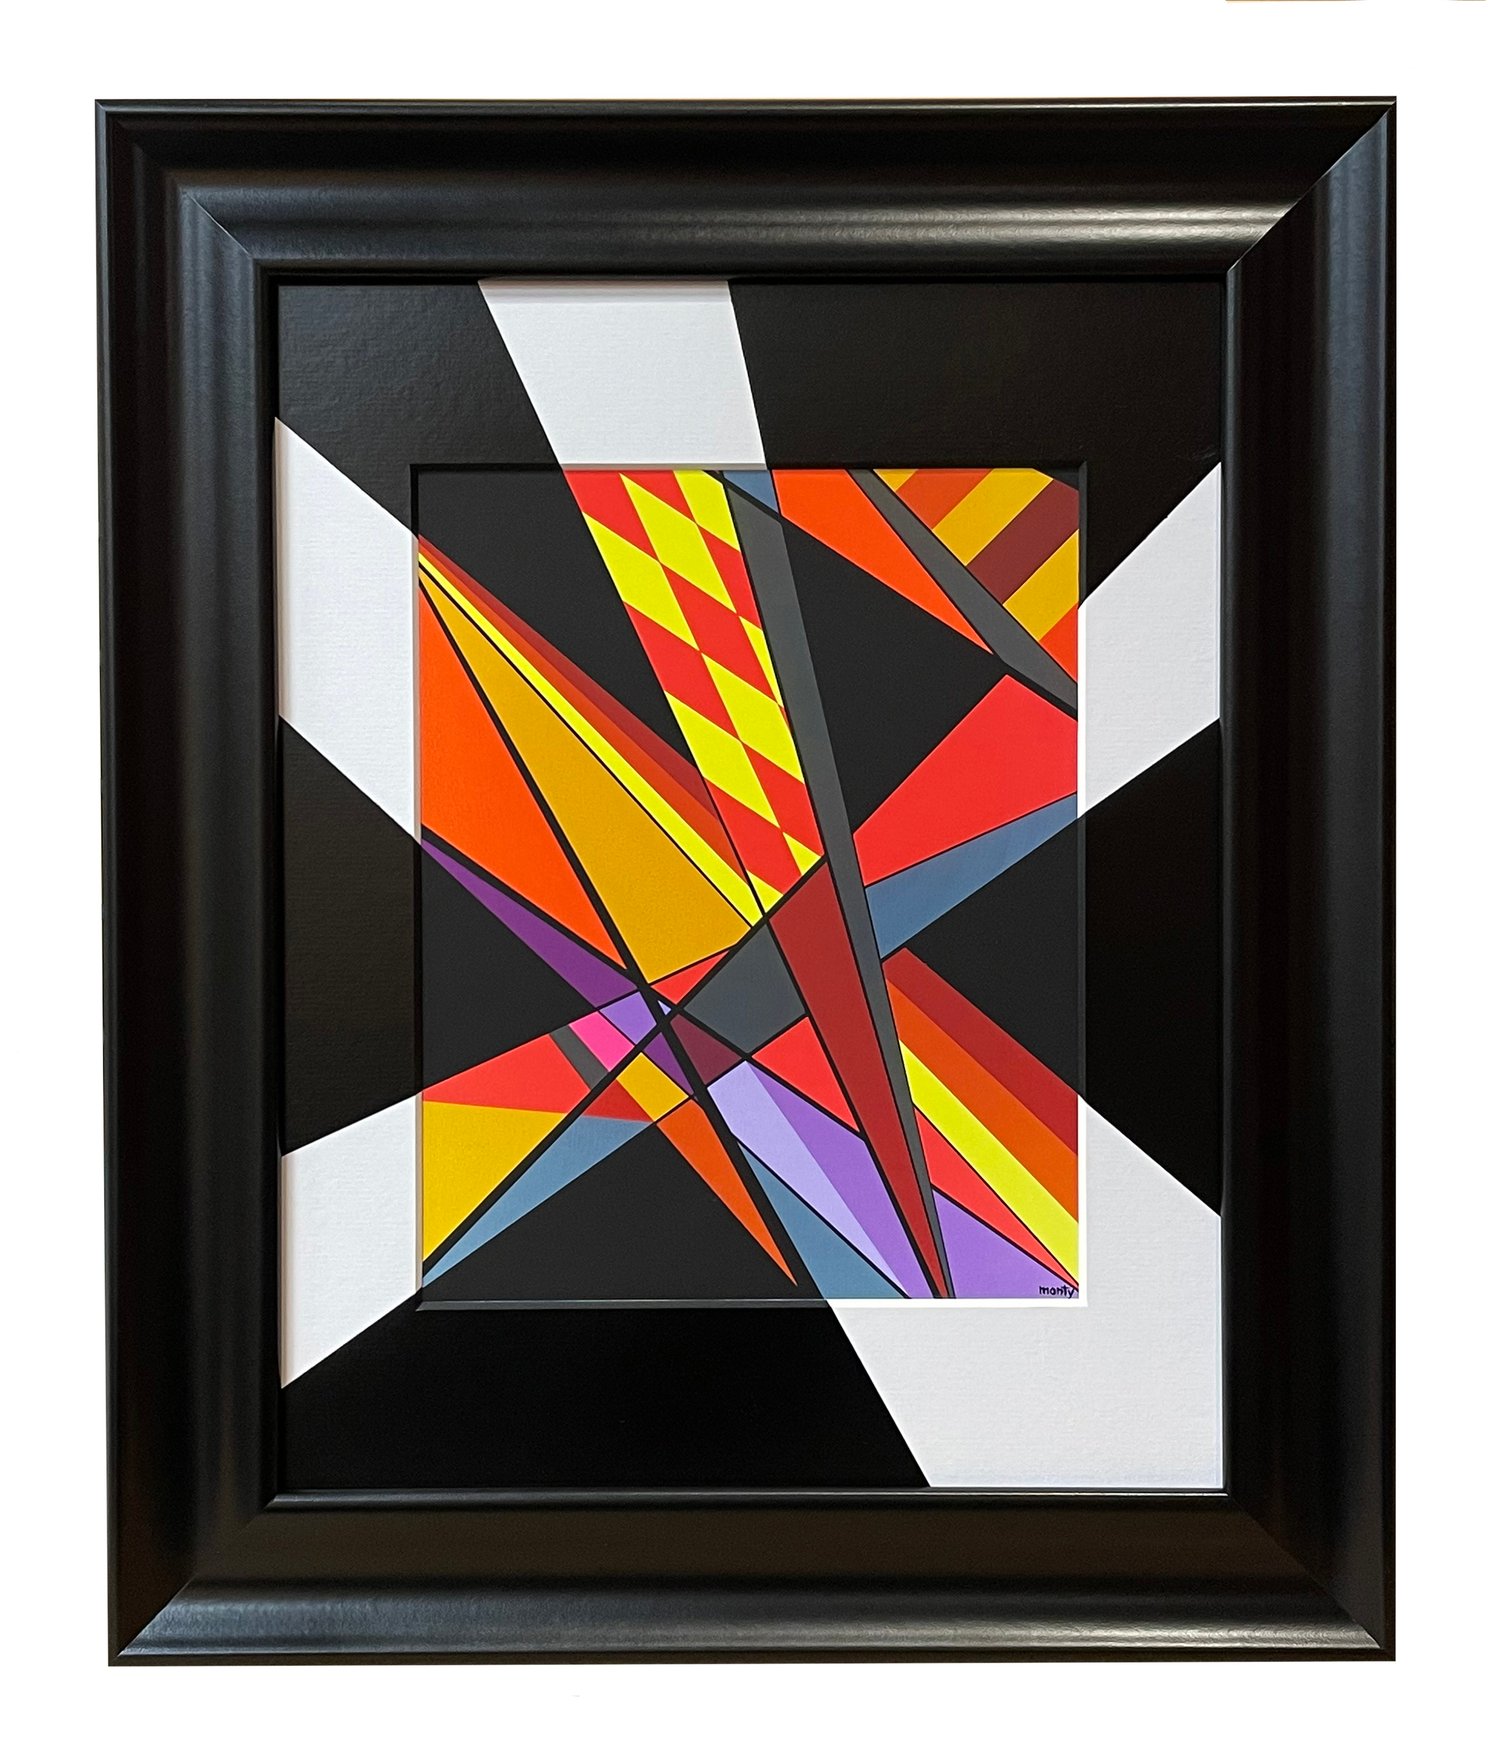 Image of "Geo #65" - Framed archival pigment print on paper - The Geo Series